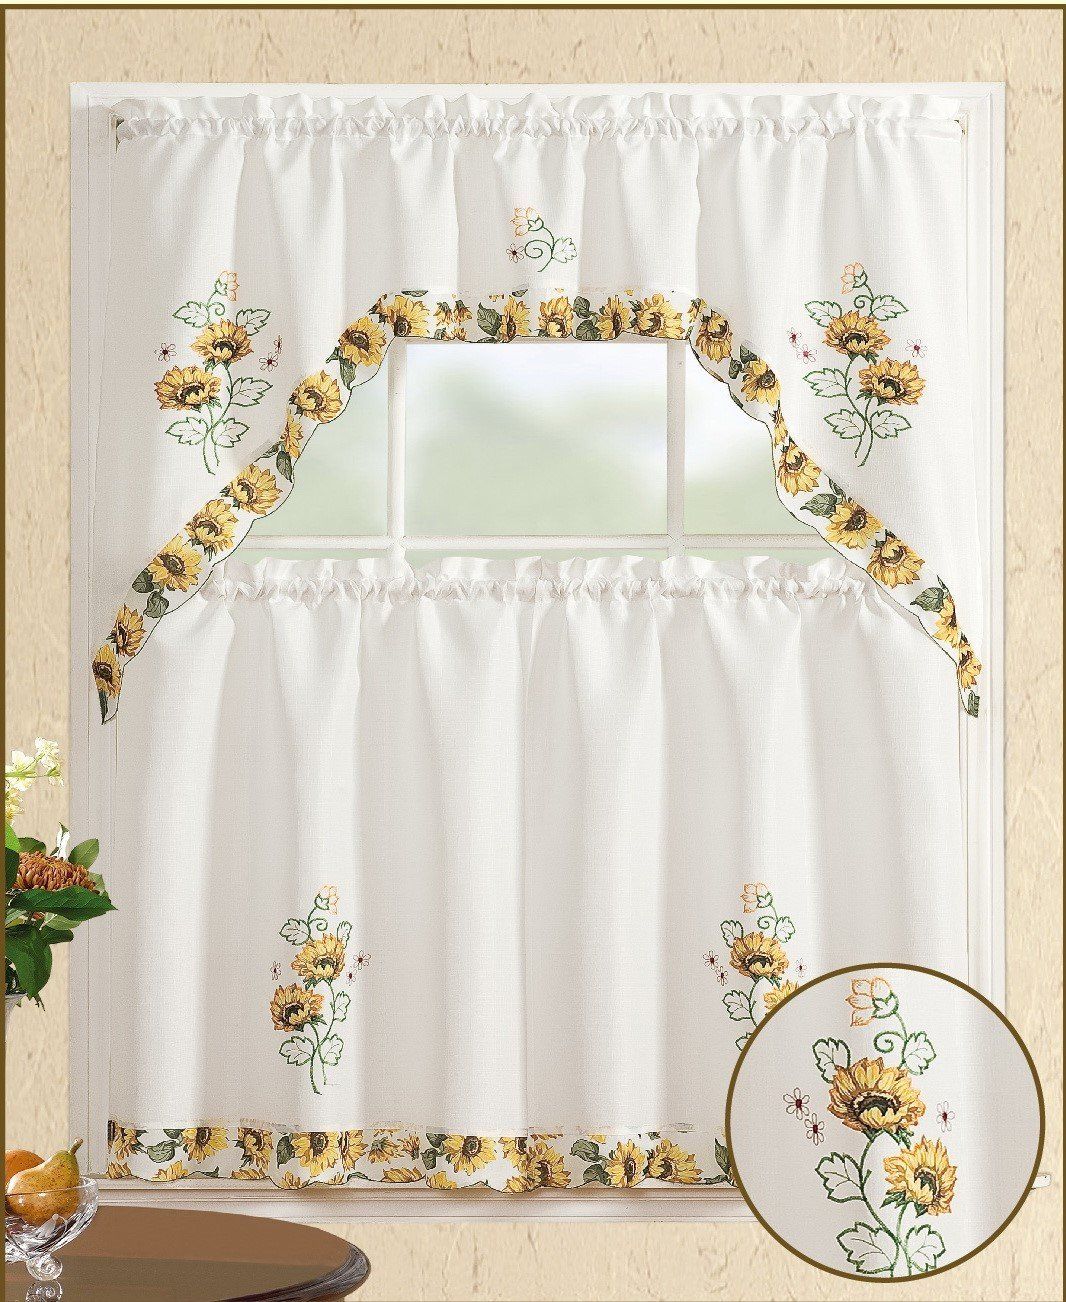 Details About All American Collection 3pc Sunflower Kitchen Curtain Set In Traditional Tailored Window Curtains With Embroidered Yellow Sunflowers (View 11 of 20)